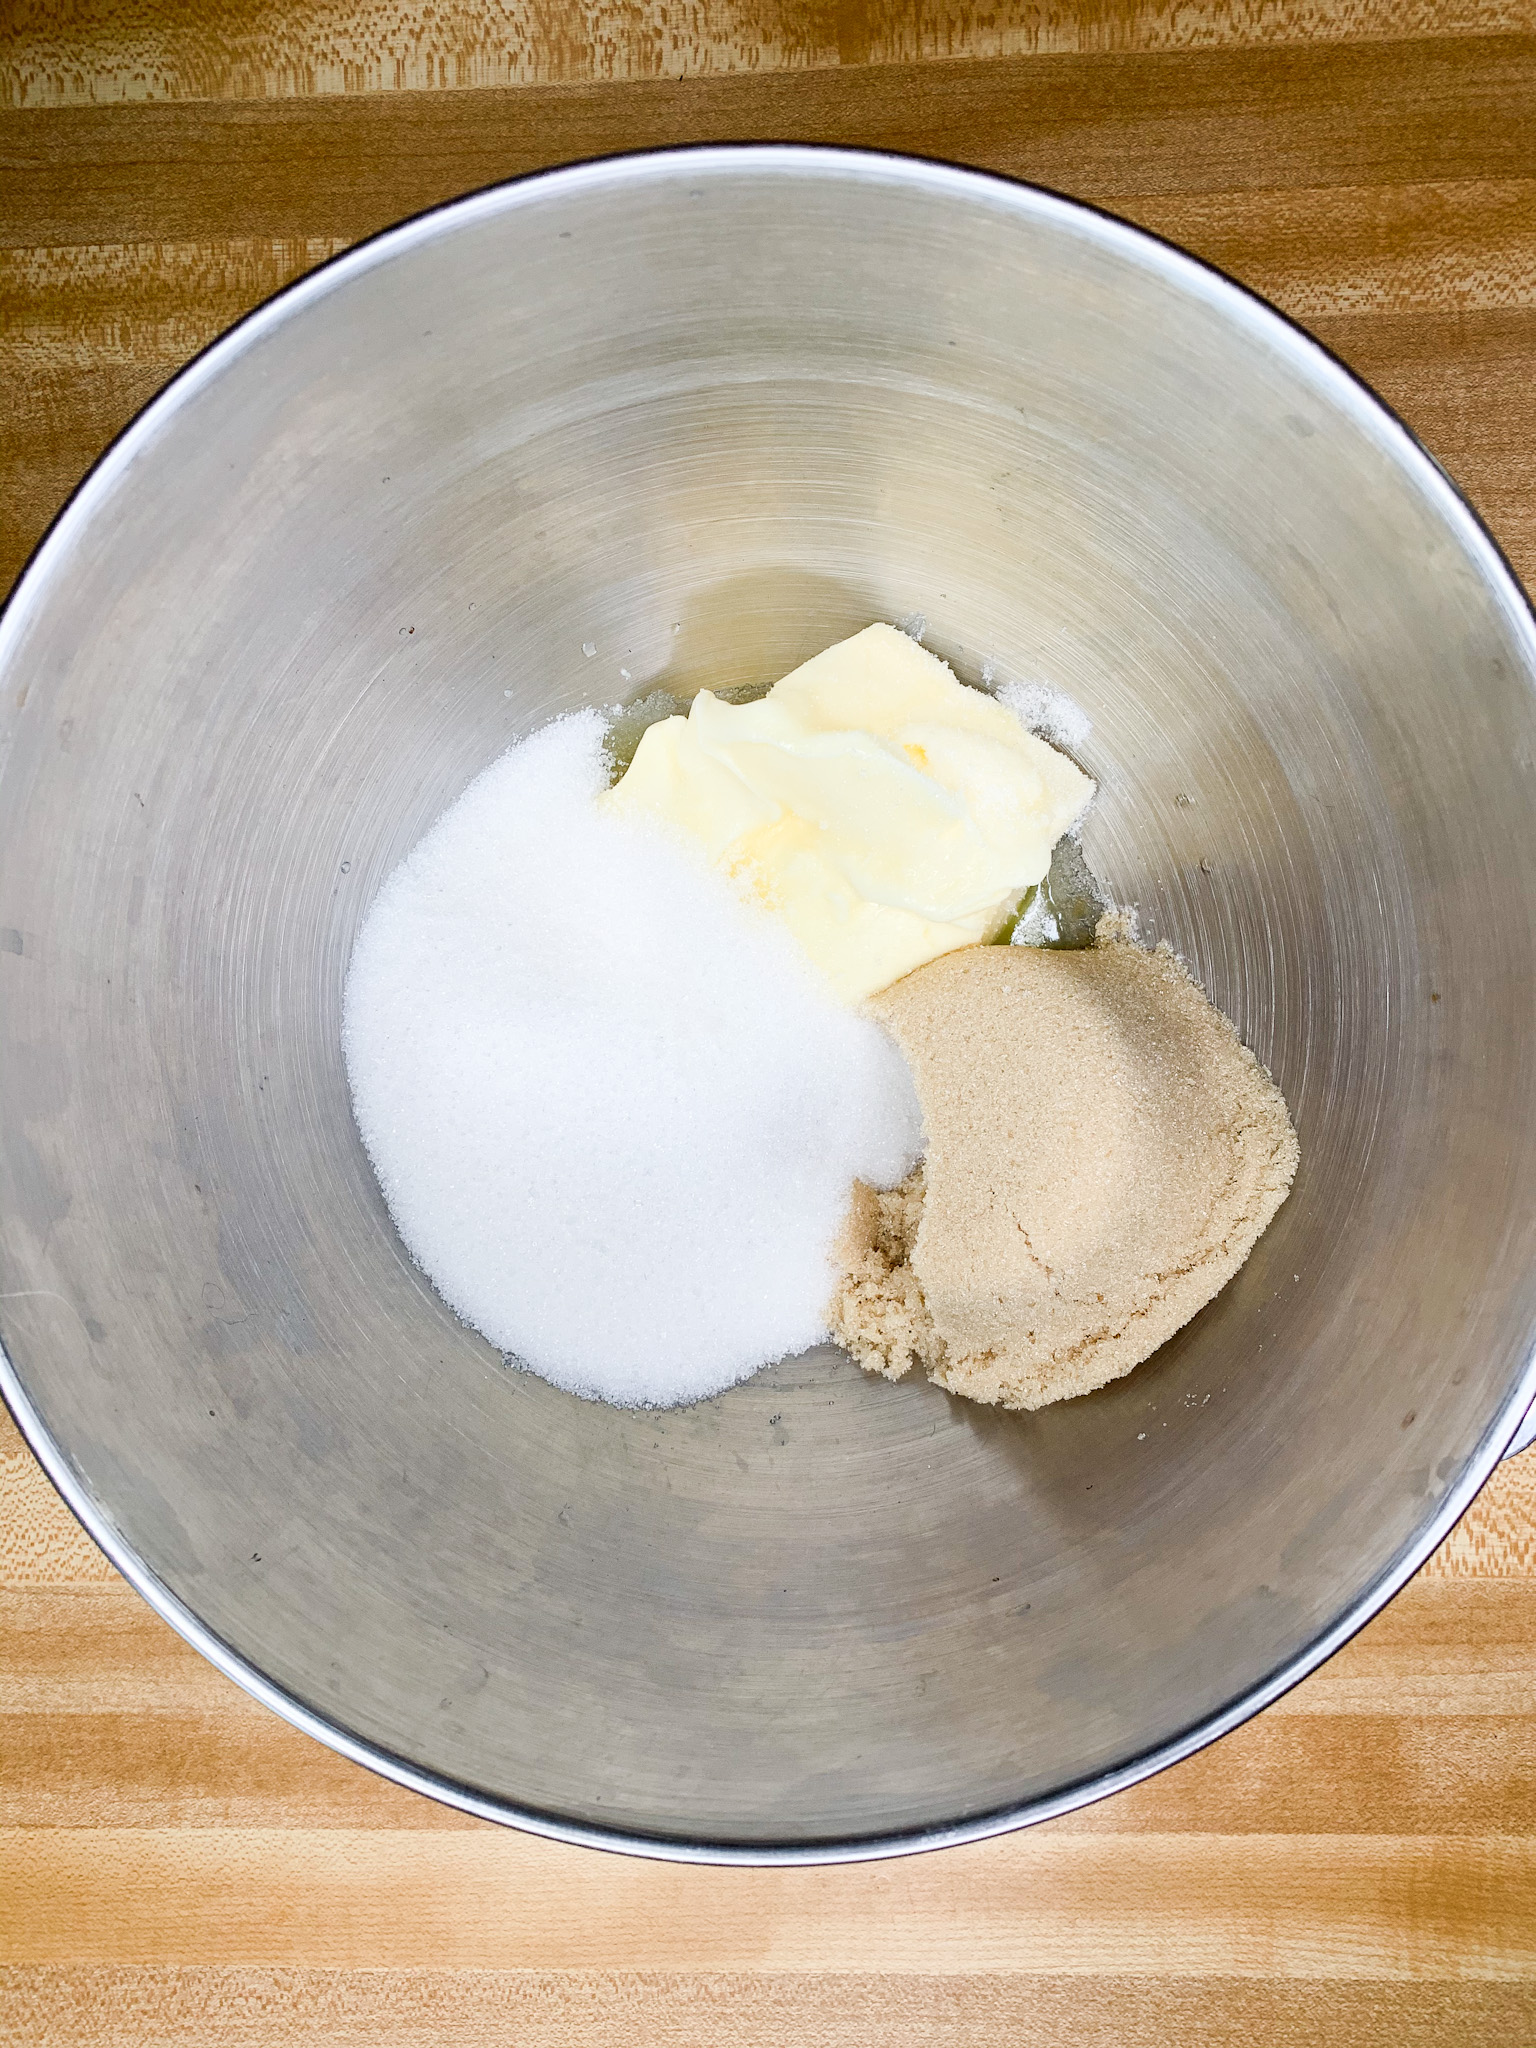 butter, white sugar, and brown sugar in a bowl